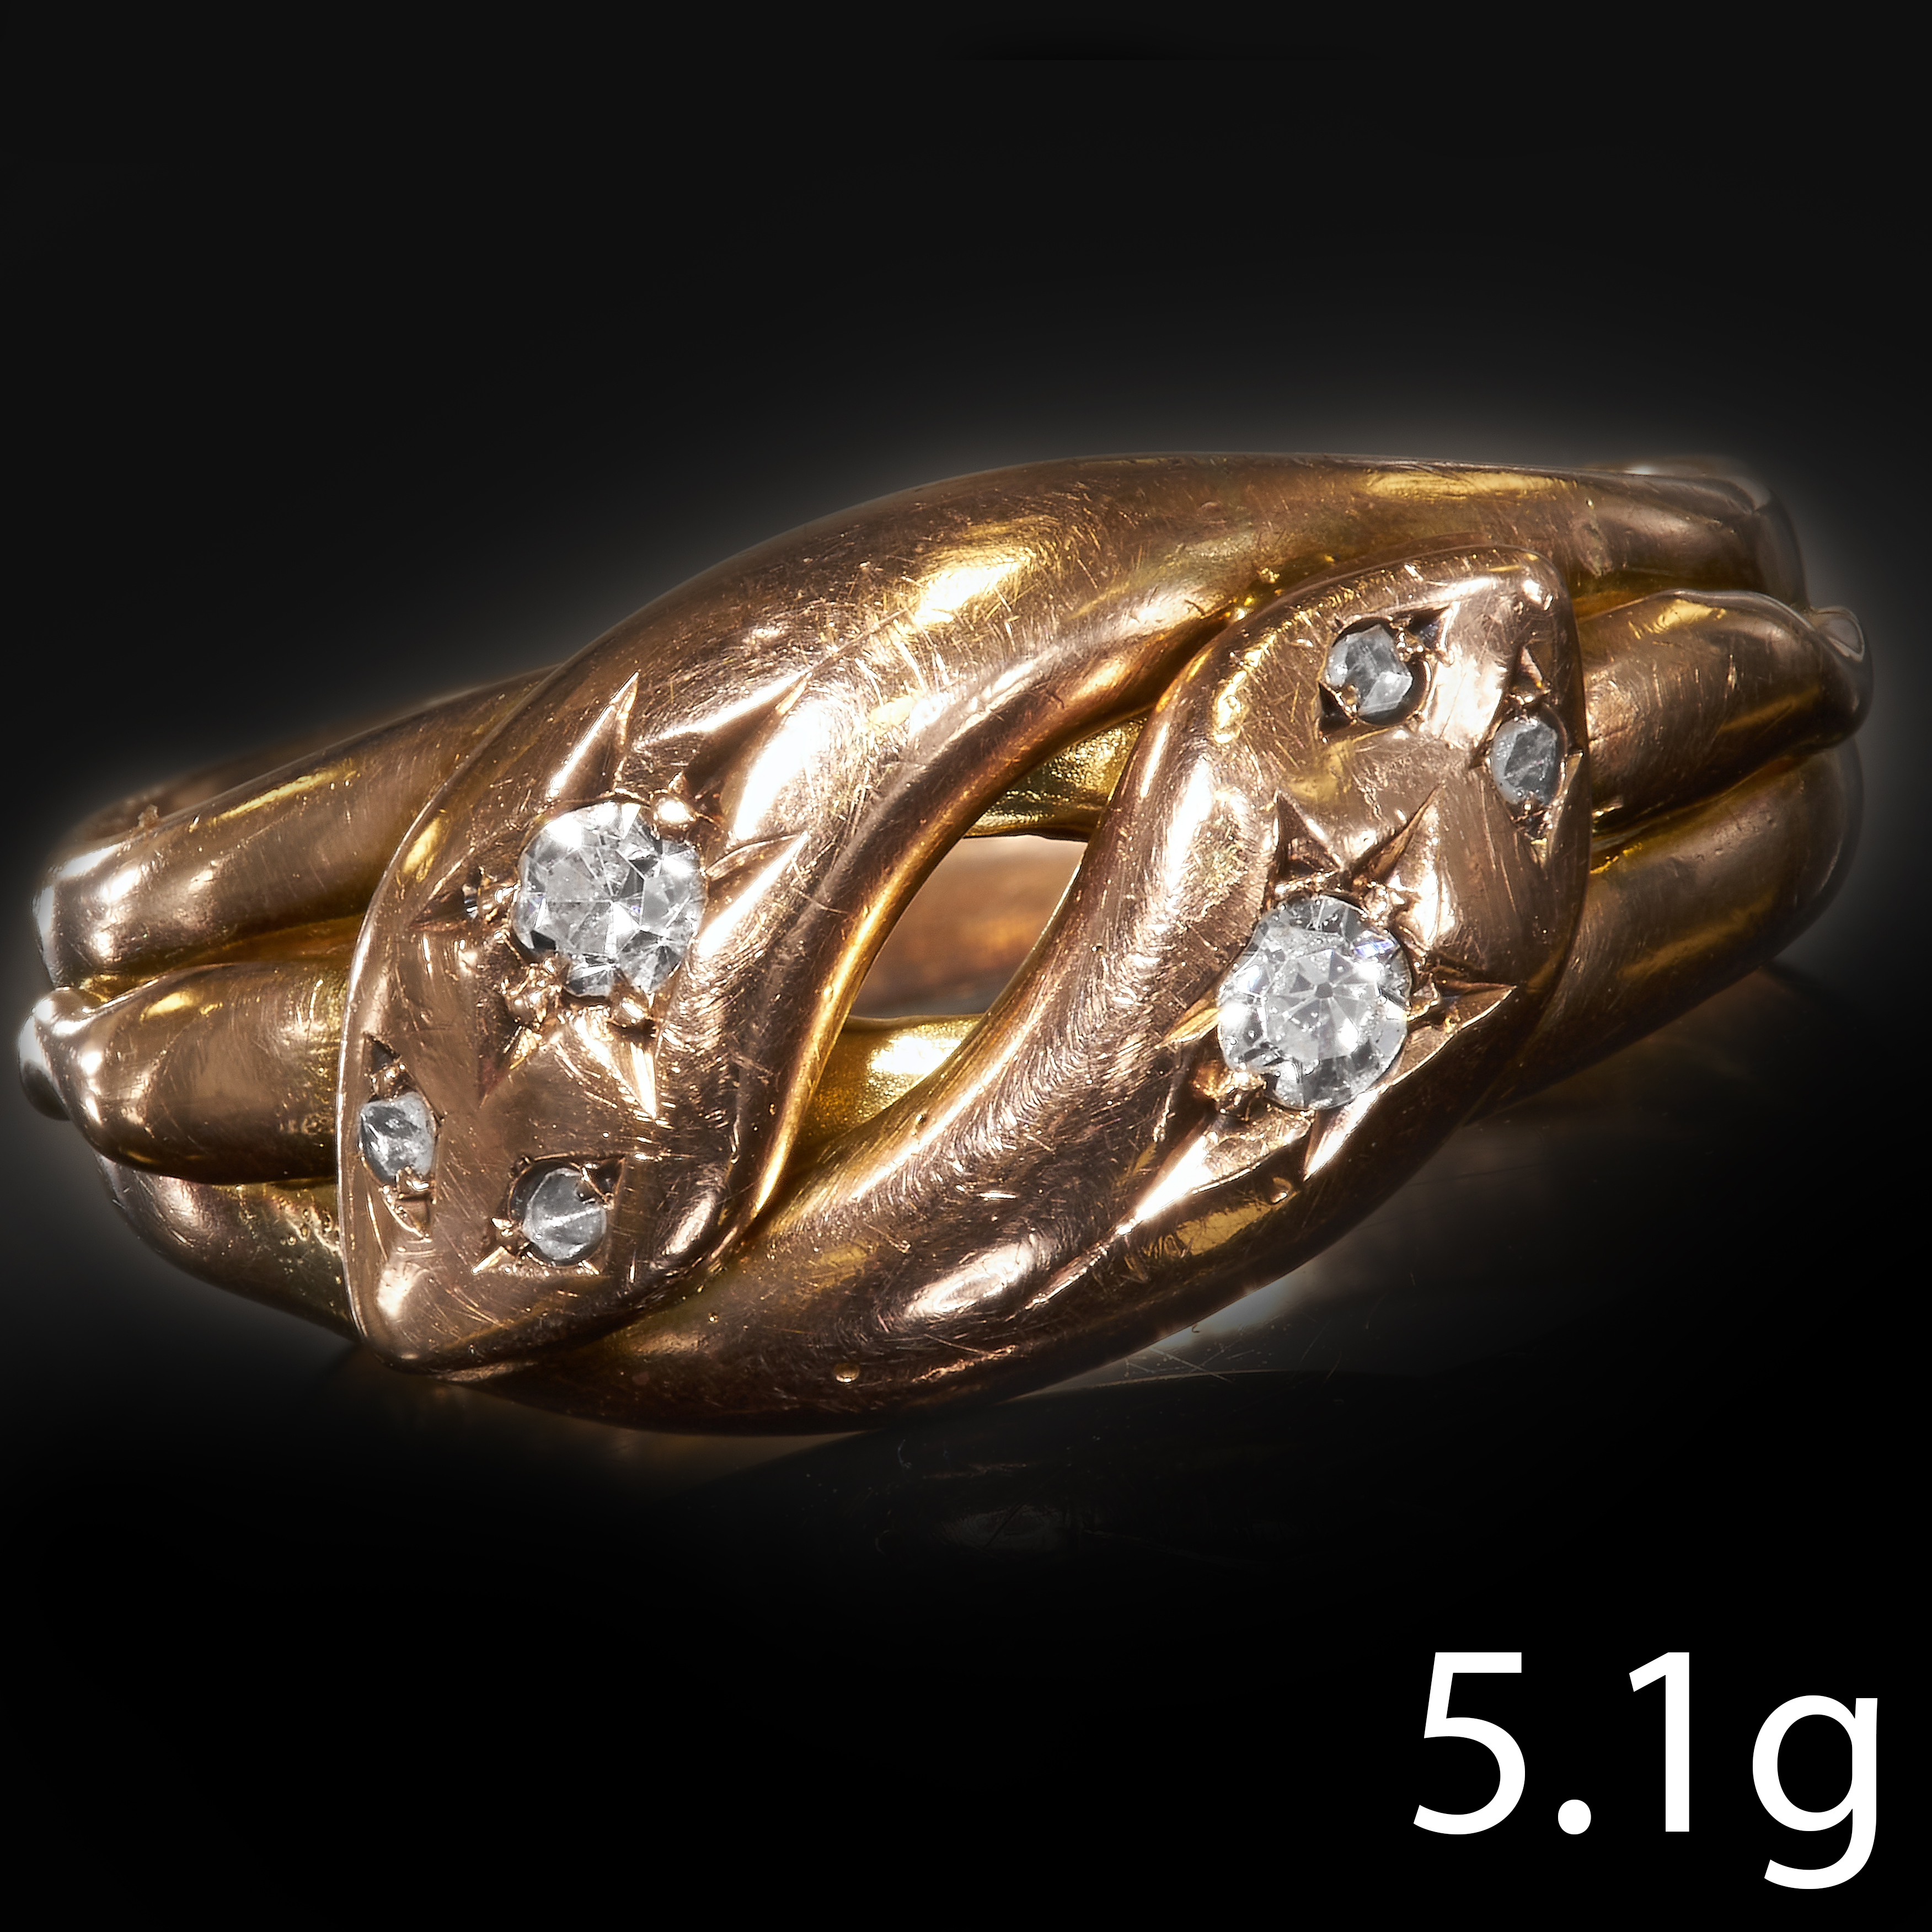 ANTIQUE DIAMOND DOUBLE SNAKE GOLD RING